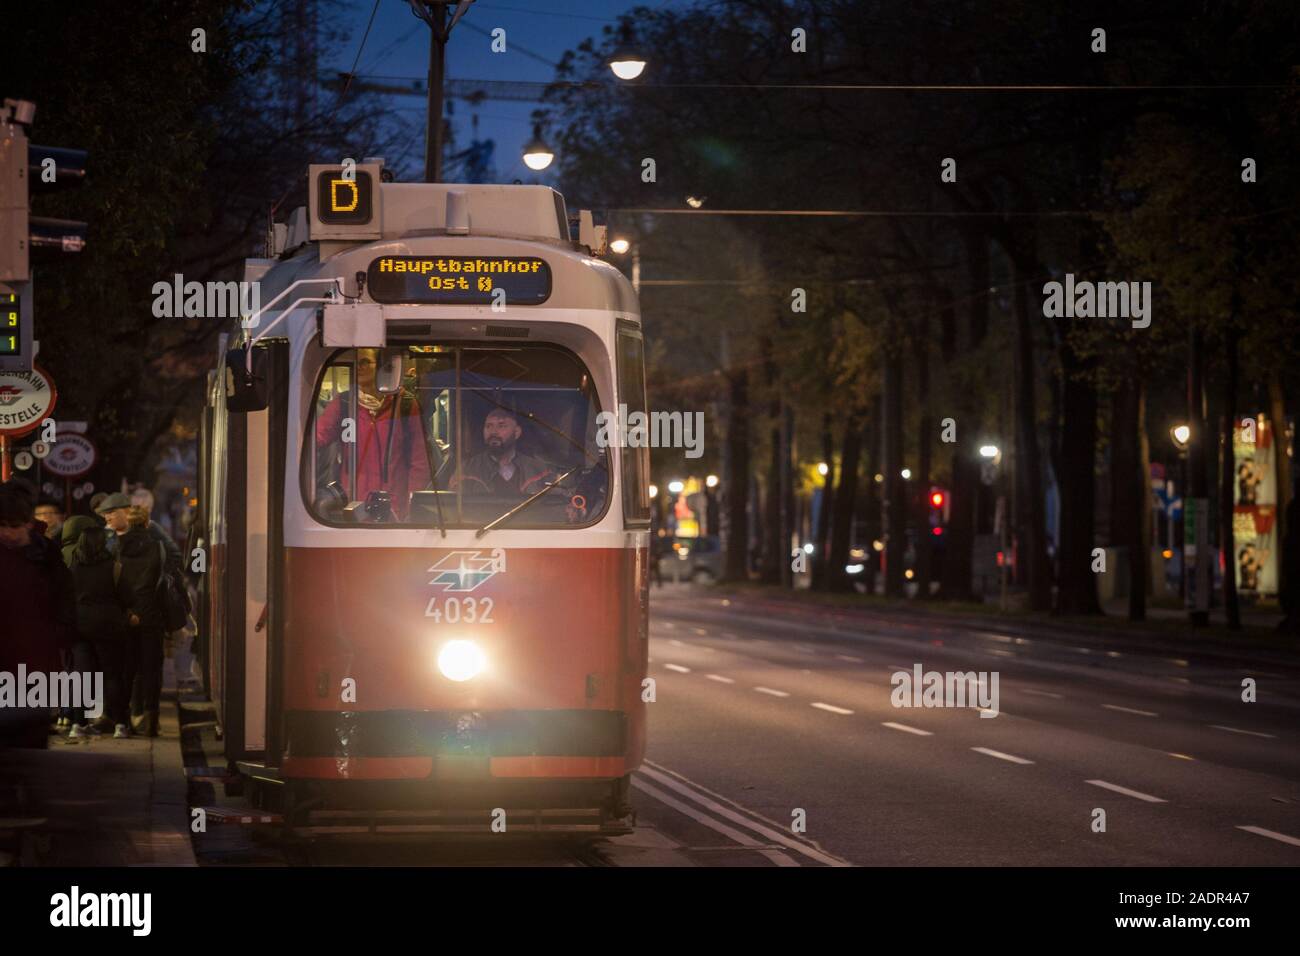 VIENNA, AUSTRIA - NOVEMBER 6, 2019: Vienna tram, also called strassenbahn, leaving a tram station at night in the center of the city. It is one of mai Stock Photo